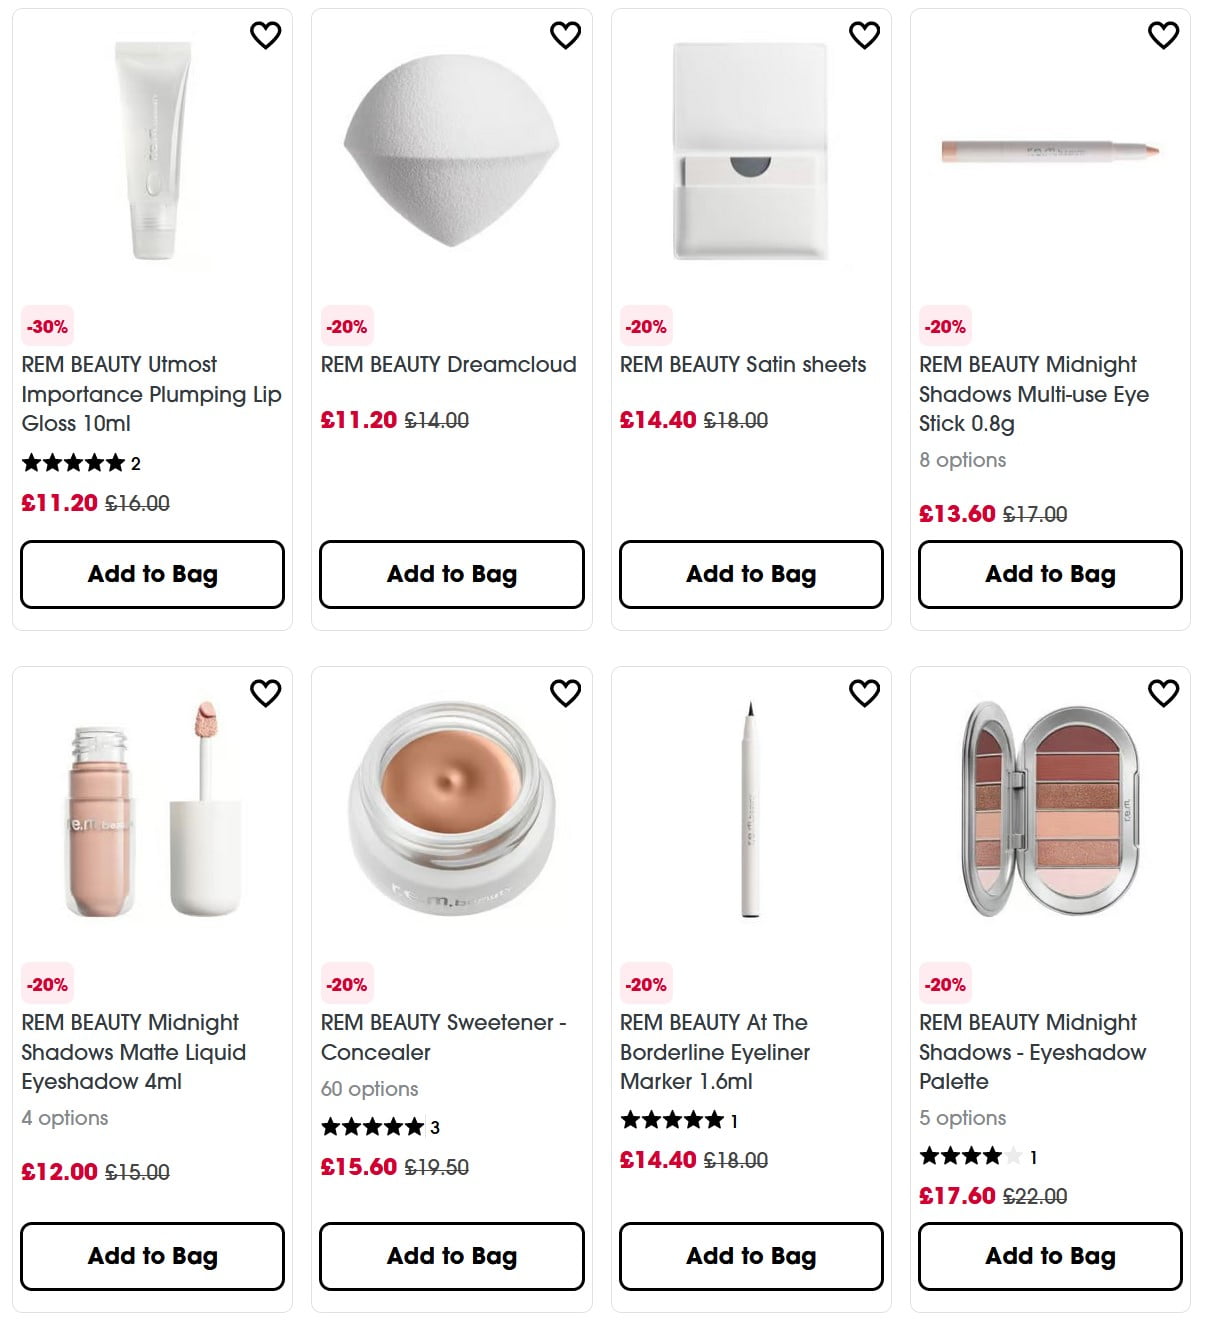 Up to 30% off R.E.M. Beauty at Sephora UK